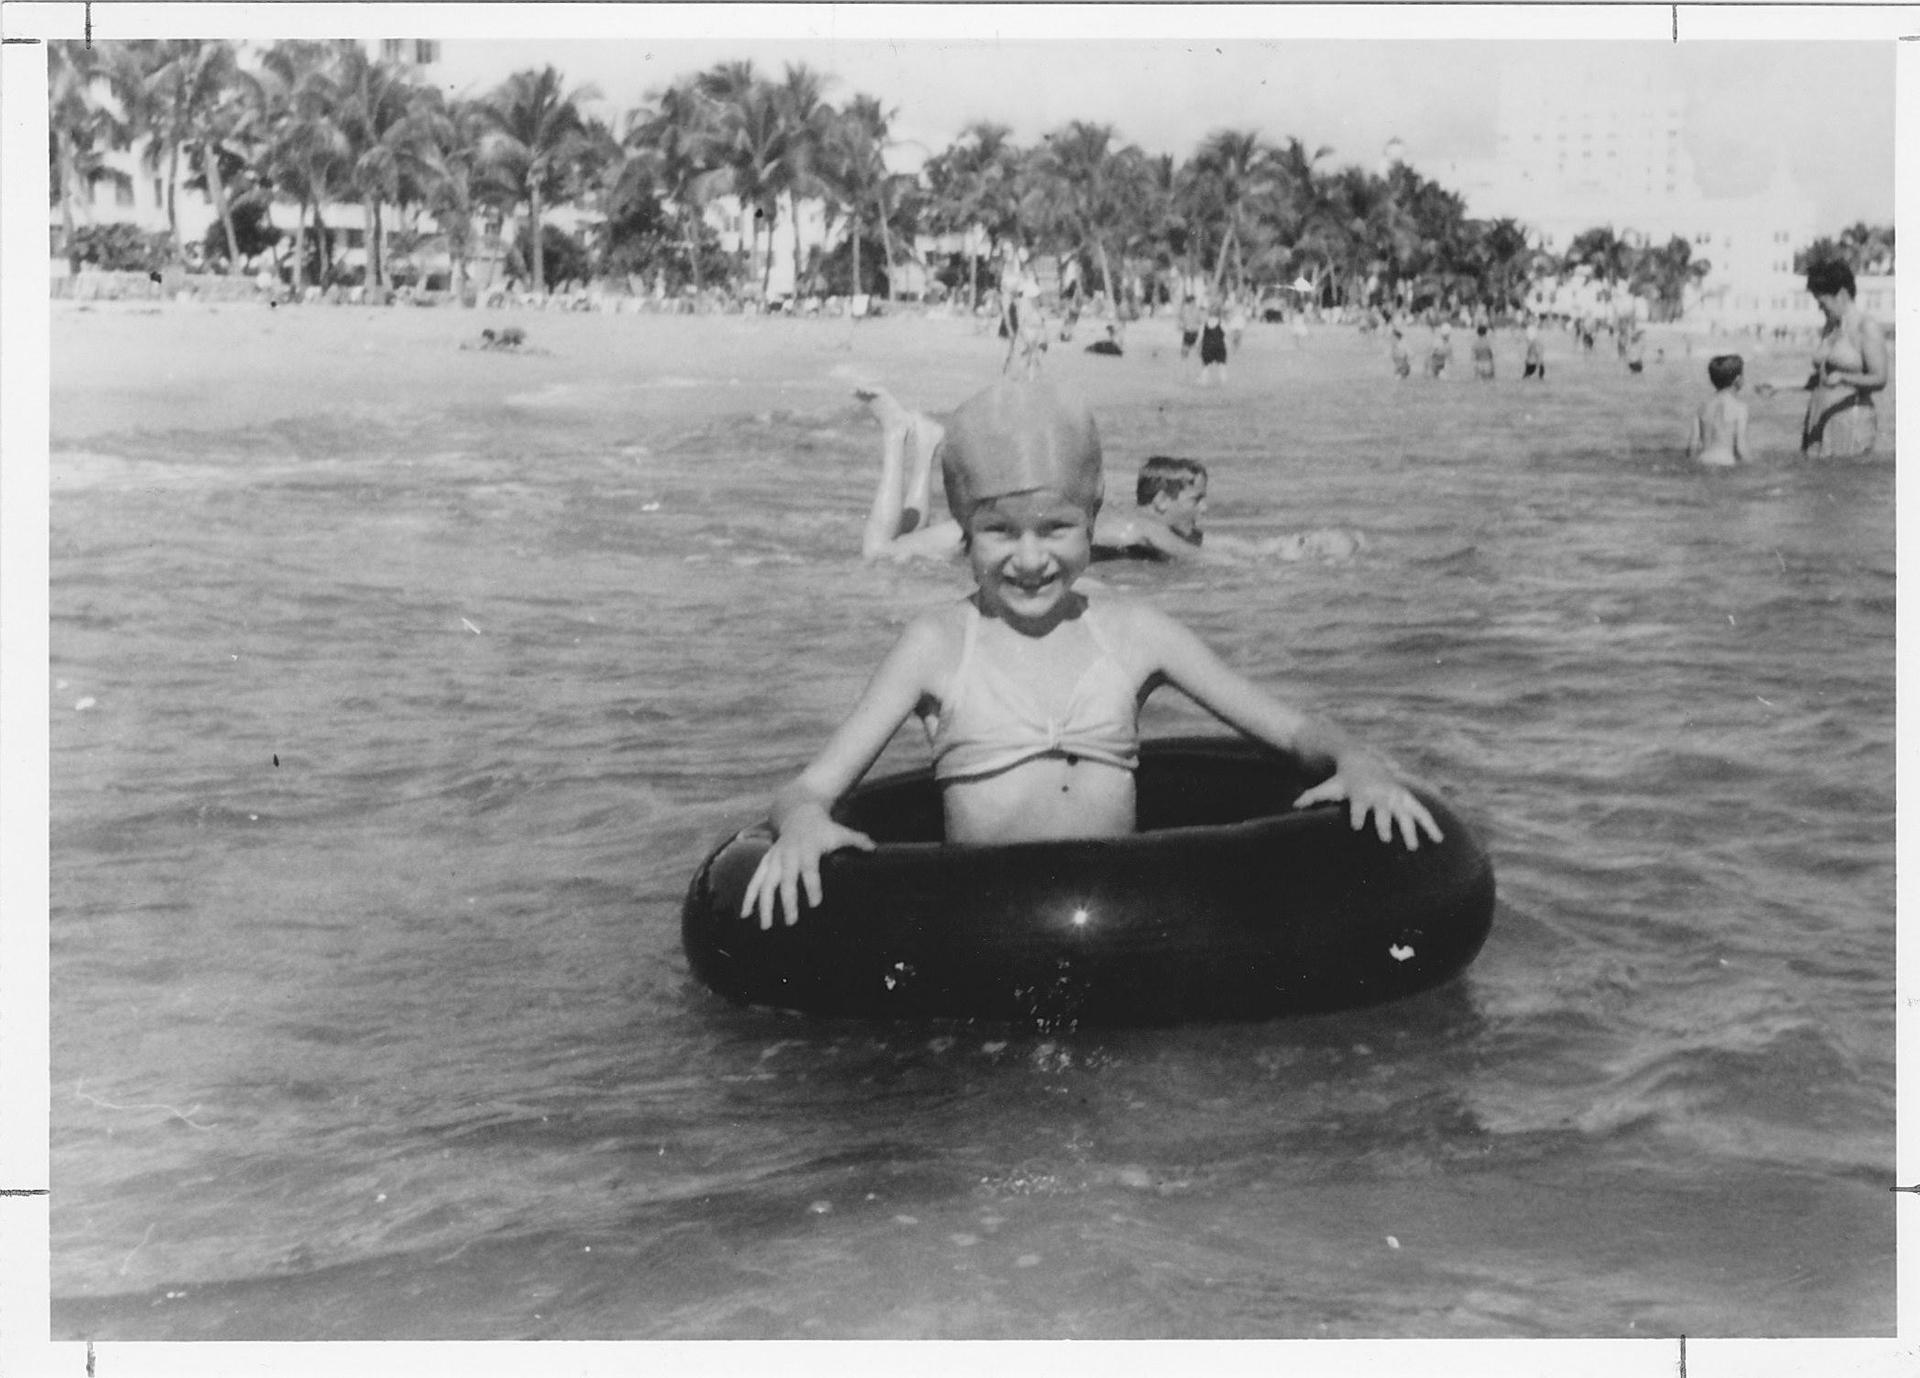 Judy in Miami Beach in the late 1940s.